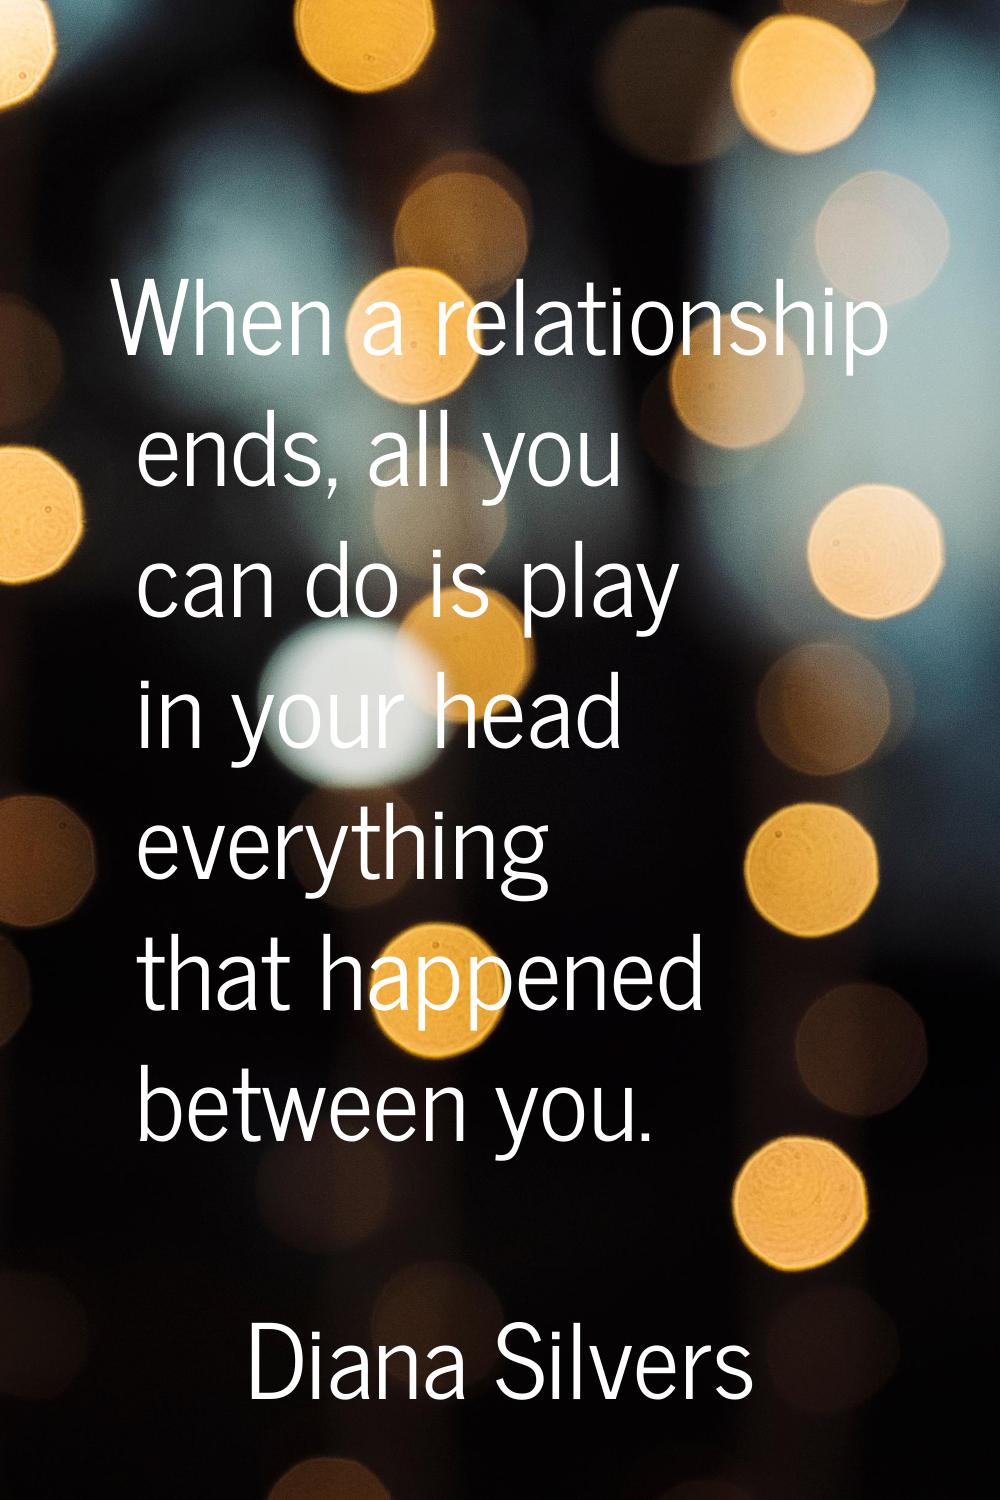 When a relationship ends, all you can do is play in your head everything that happened between you.